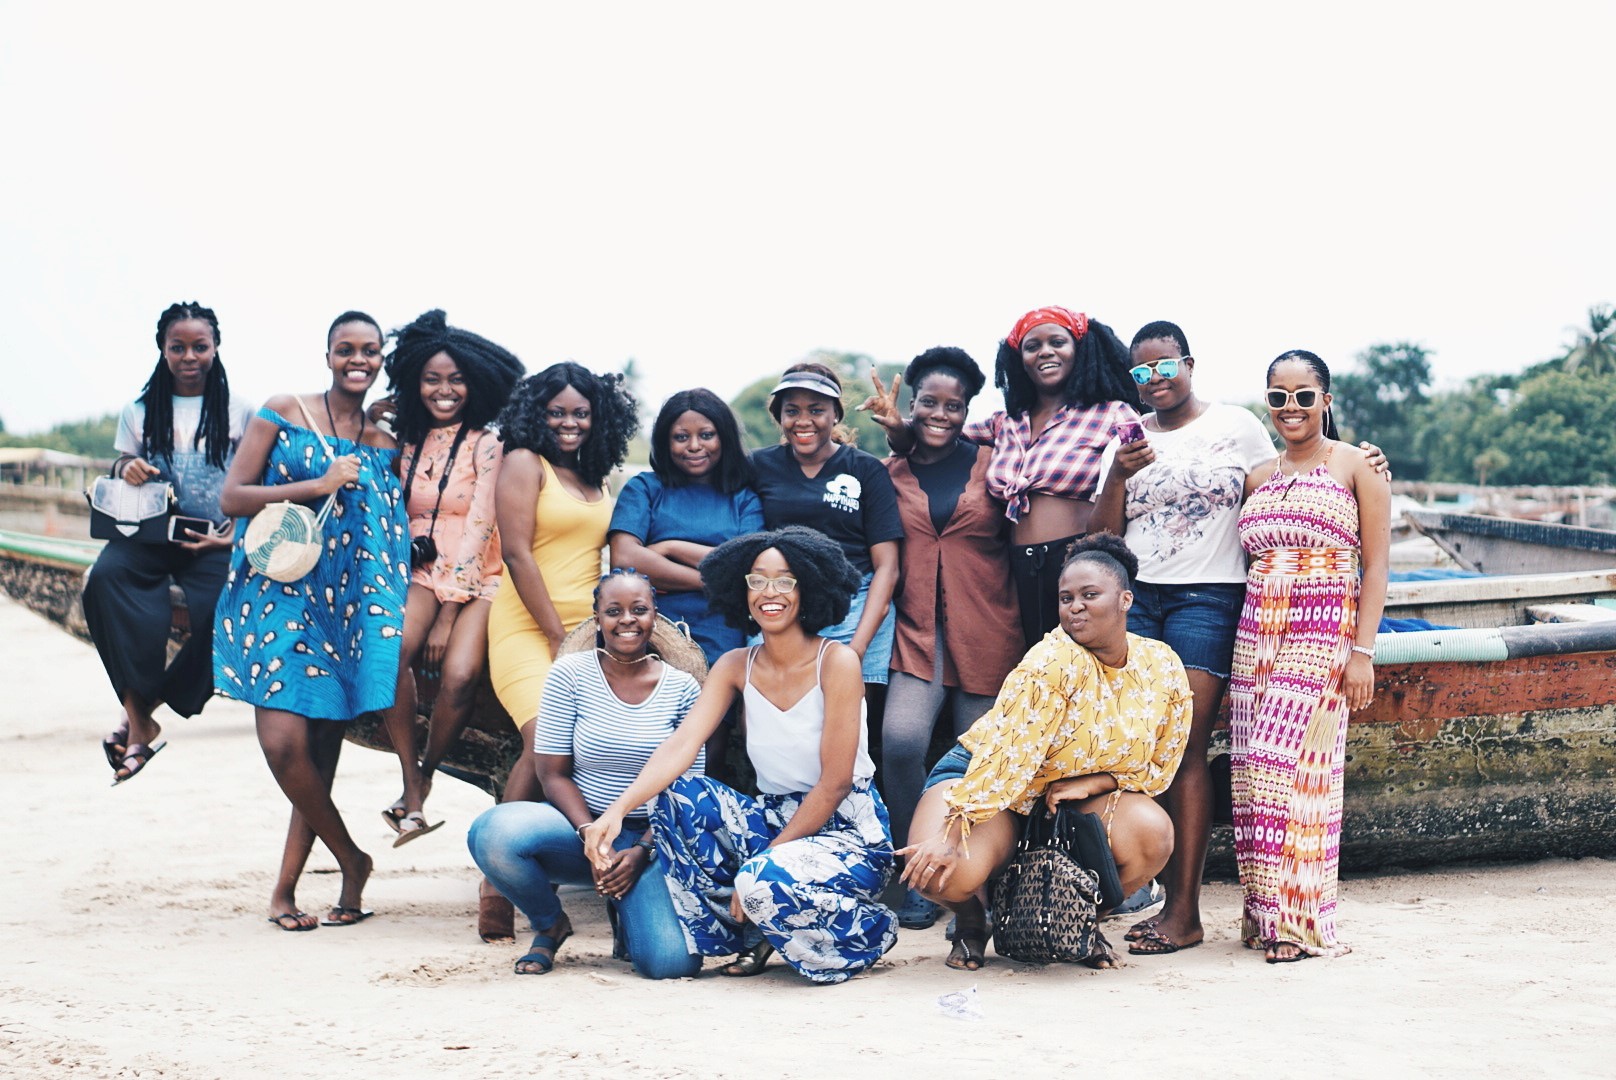 Cassie Daves and a group of explorers at the Jaybee beach camp in tarkwa bay lagos